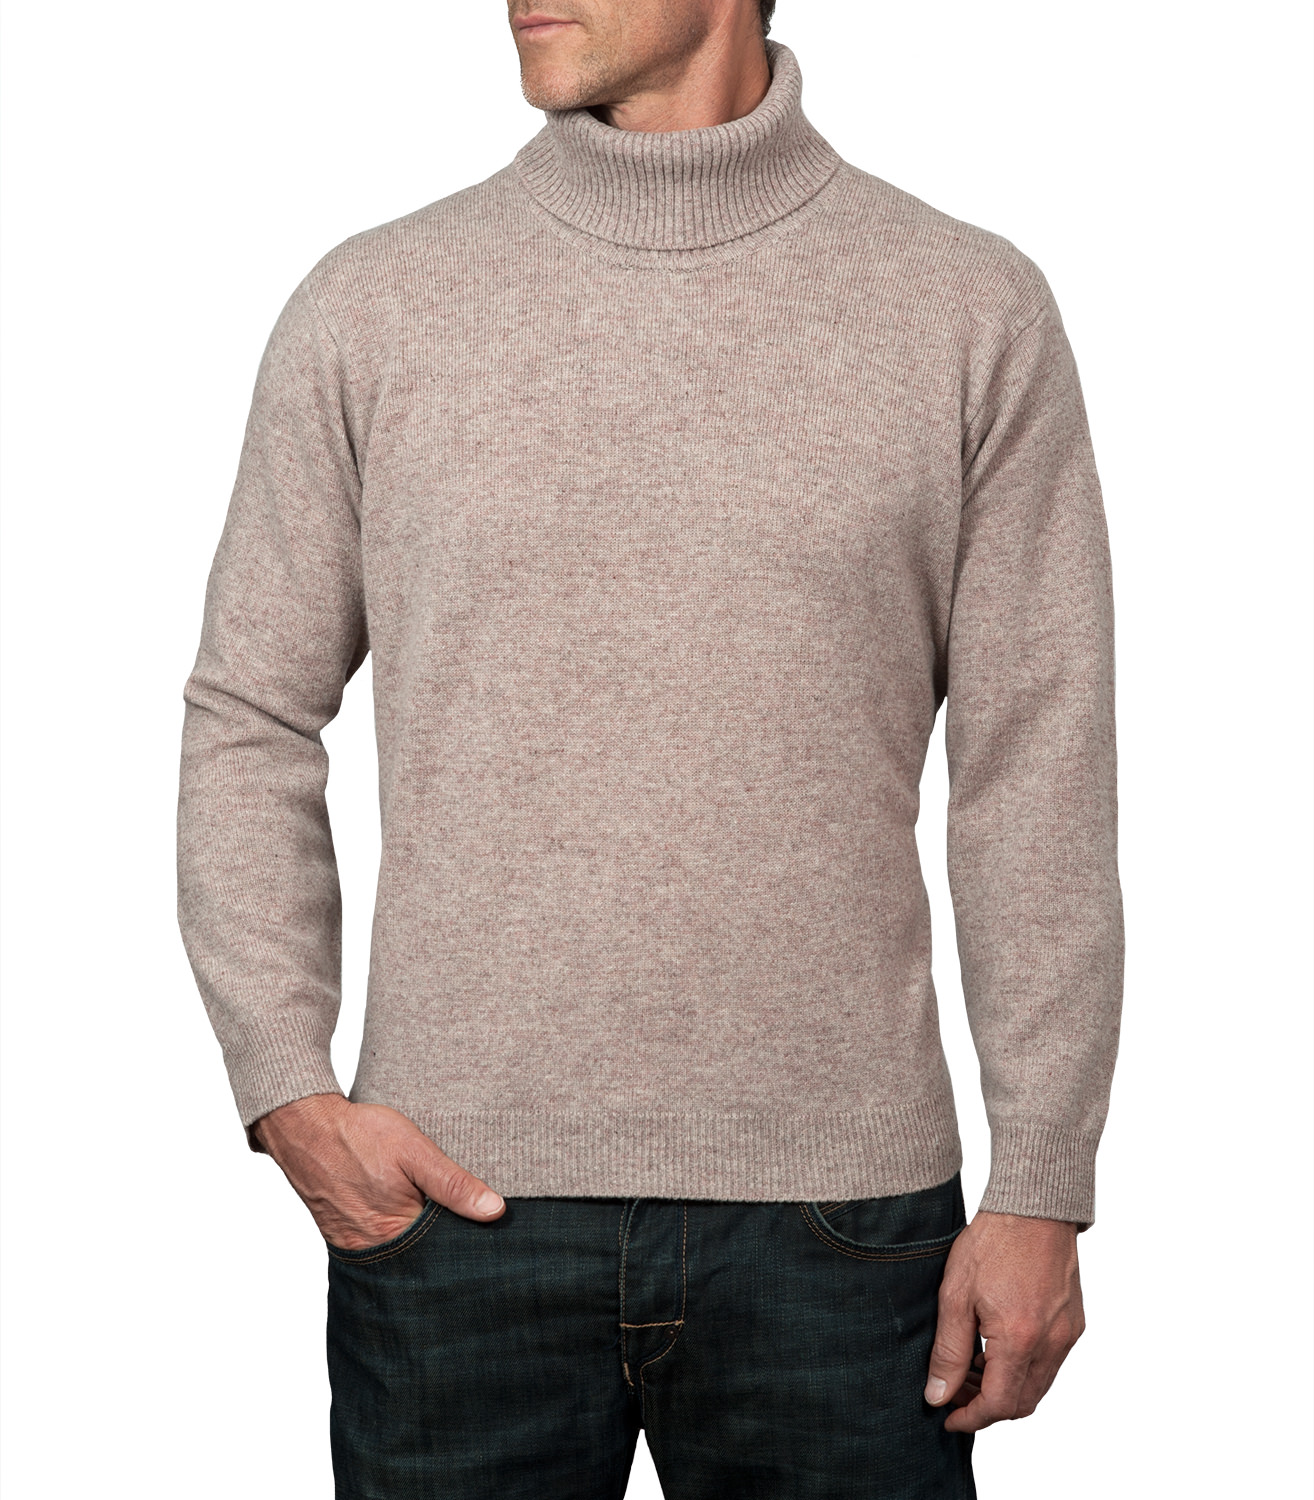 WoolOvers Mens Long Sleeve Lambswool Polo Neck Jumper Sweater Christmas Knitted | eBay